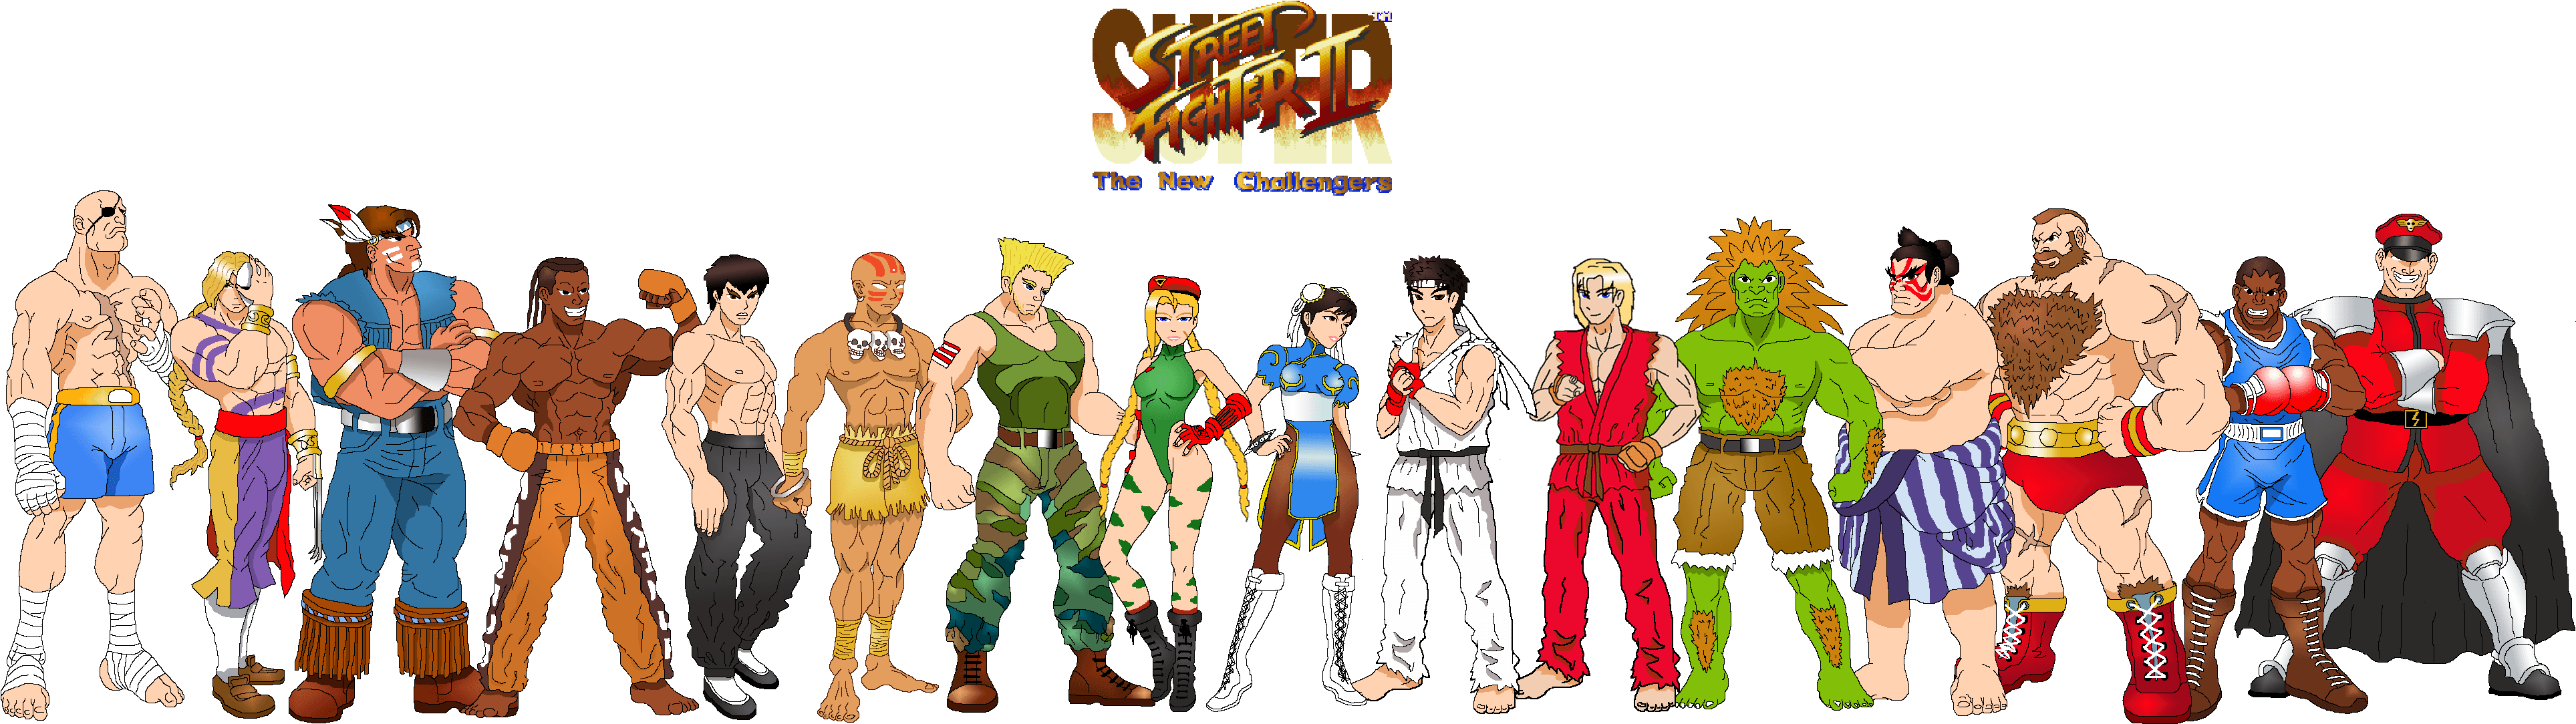 Download Street Fighter 2 Wallpapers